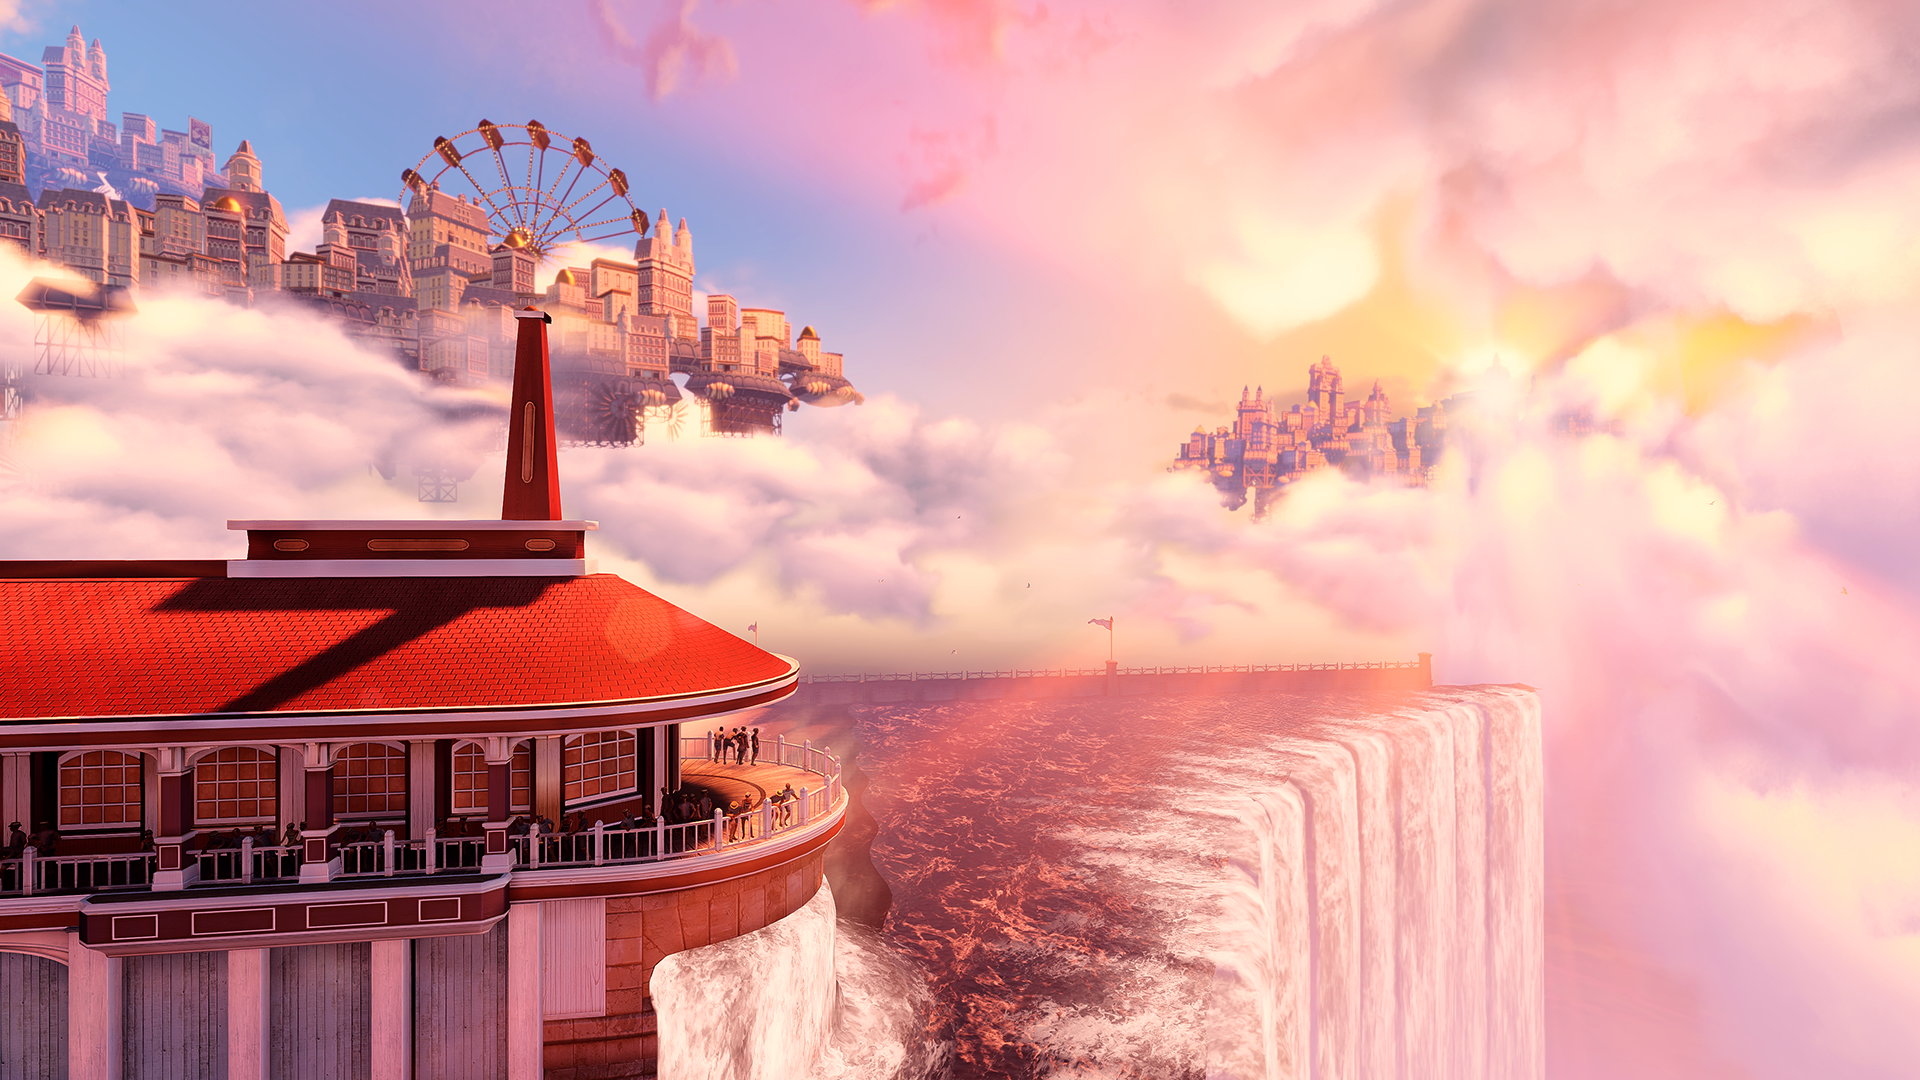 Bioshock Infinite Wallpapers, Pictures, Images